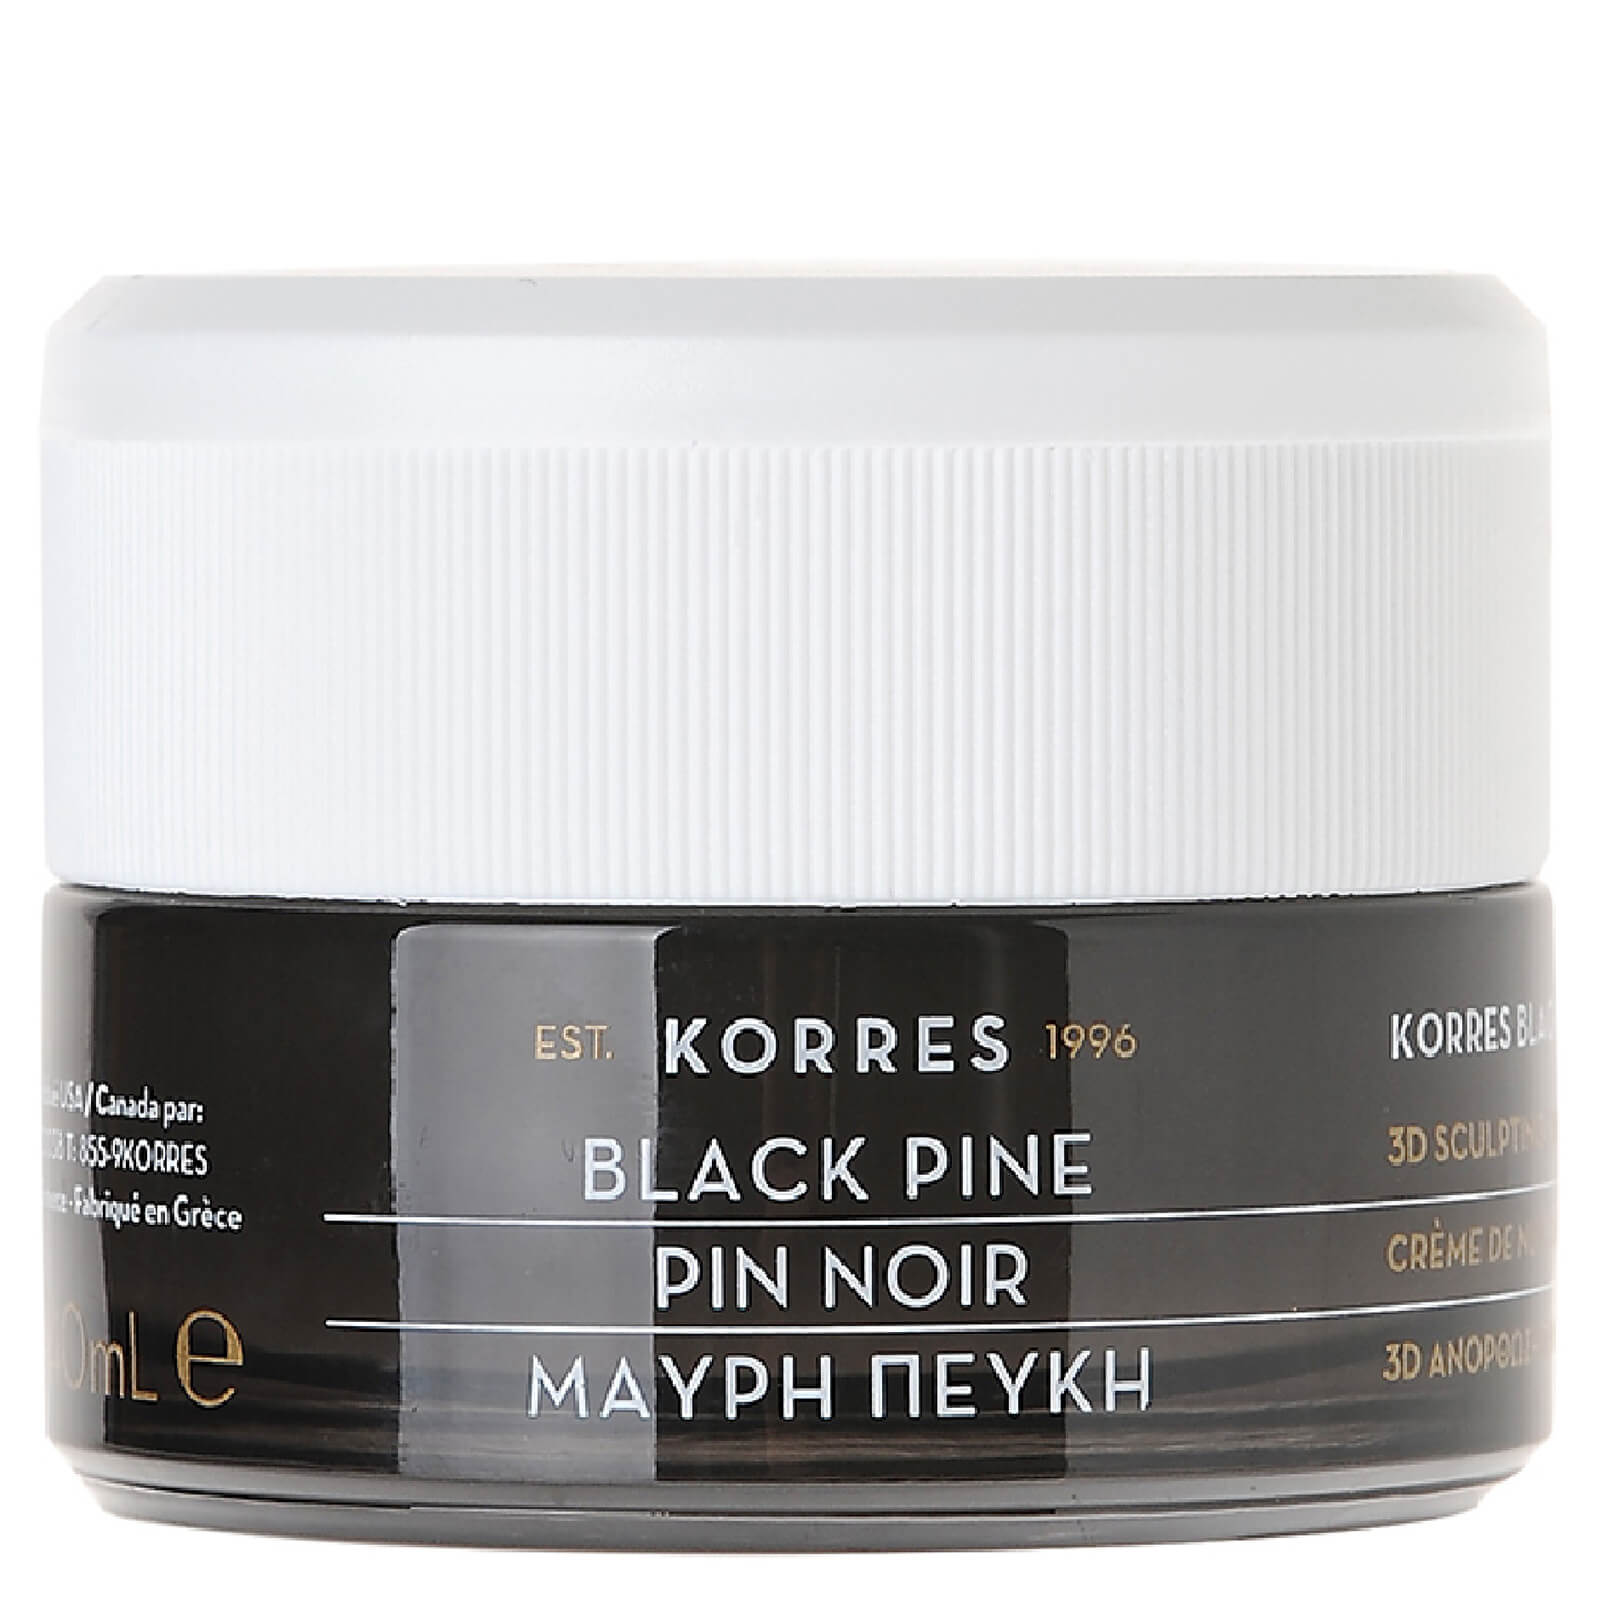 KORRES Natural 3D Black Pine Firming and Lifting Day Cream for Normal/Combination Skin 40ml